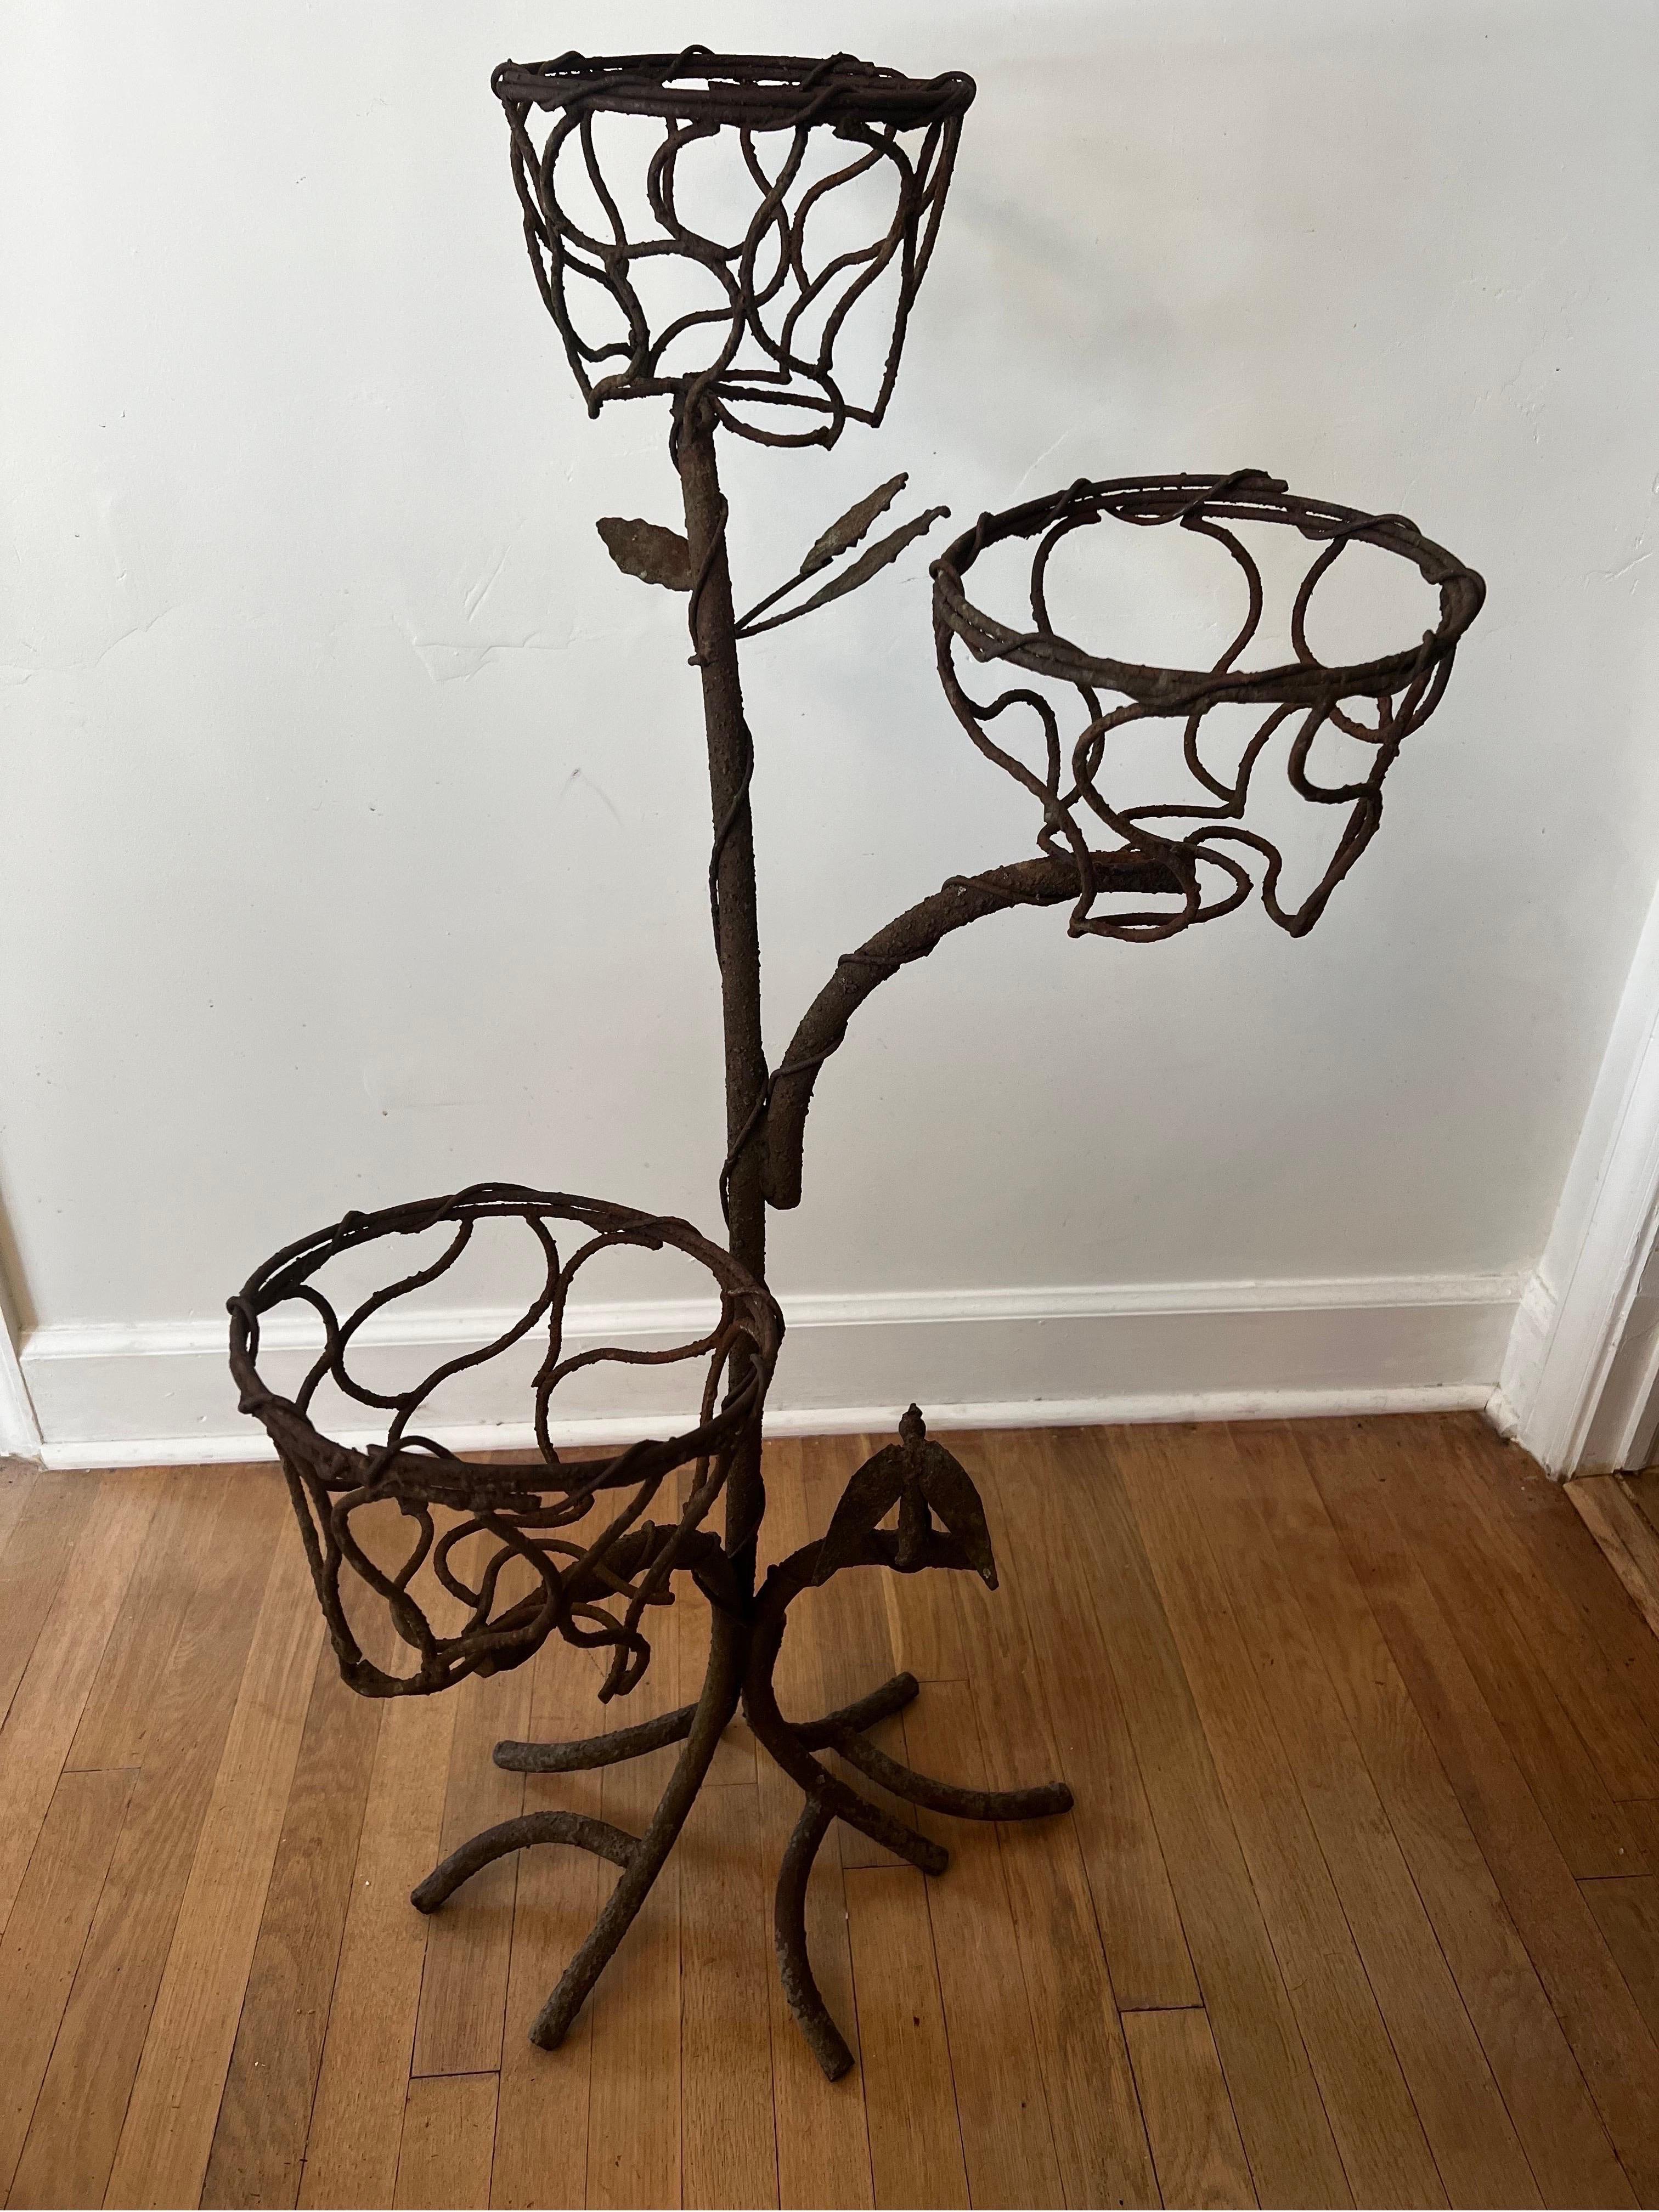 Unique one of a kind wrought iron plant stand in the style of Giacometti. 
Branches with leaves and a signature bird nestled at the bottom.

3 tiers all in solid condition to hold plants with pots or left as is.  Dried boxwoods pictured are NOT